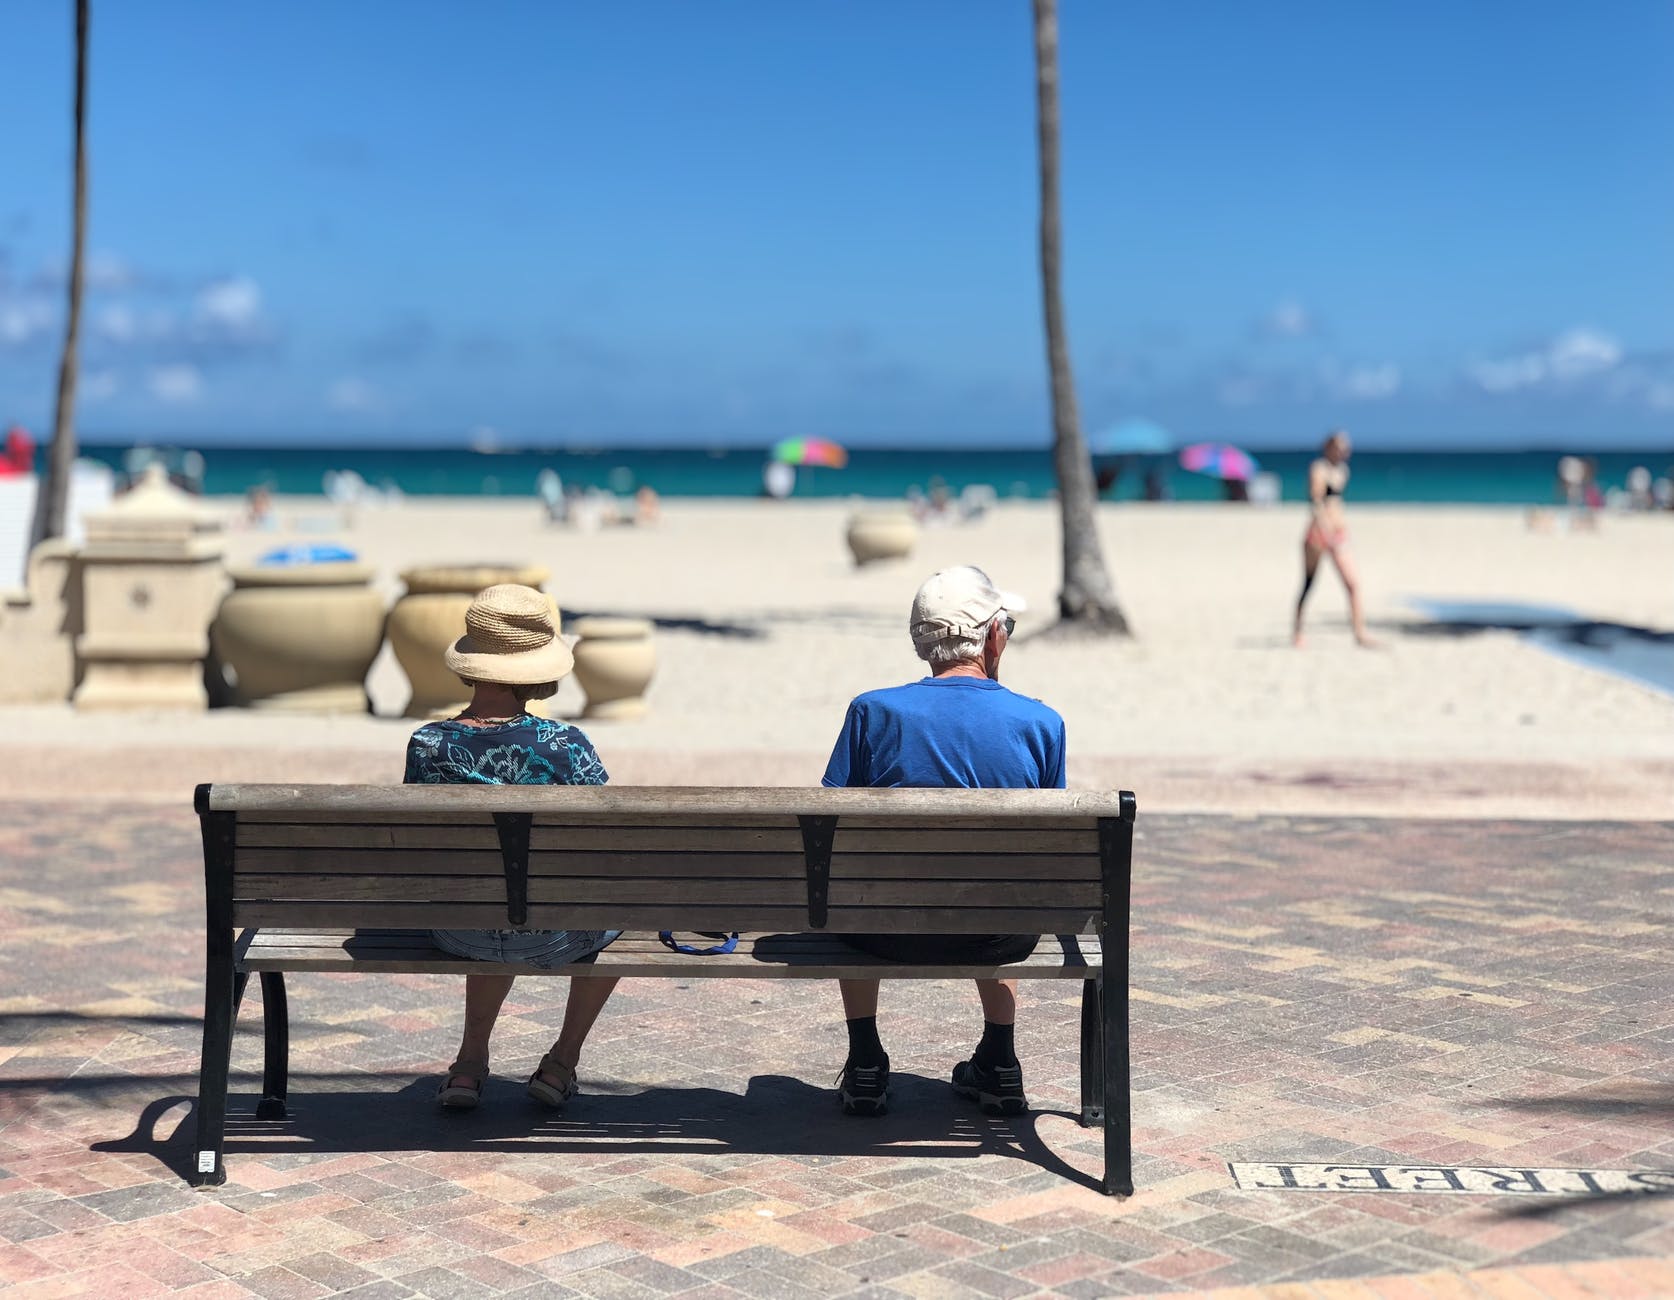 The Pros & Cons of Seniors Retiring Early